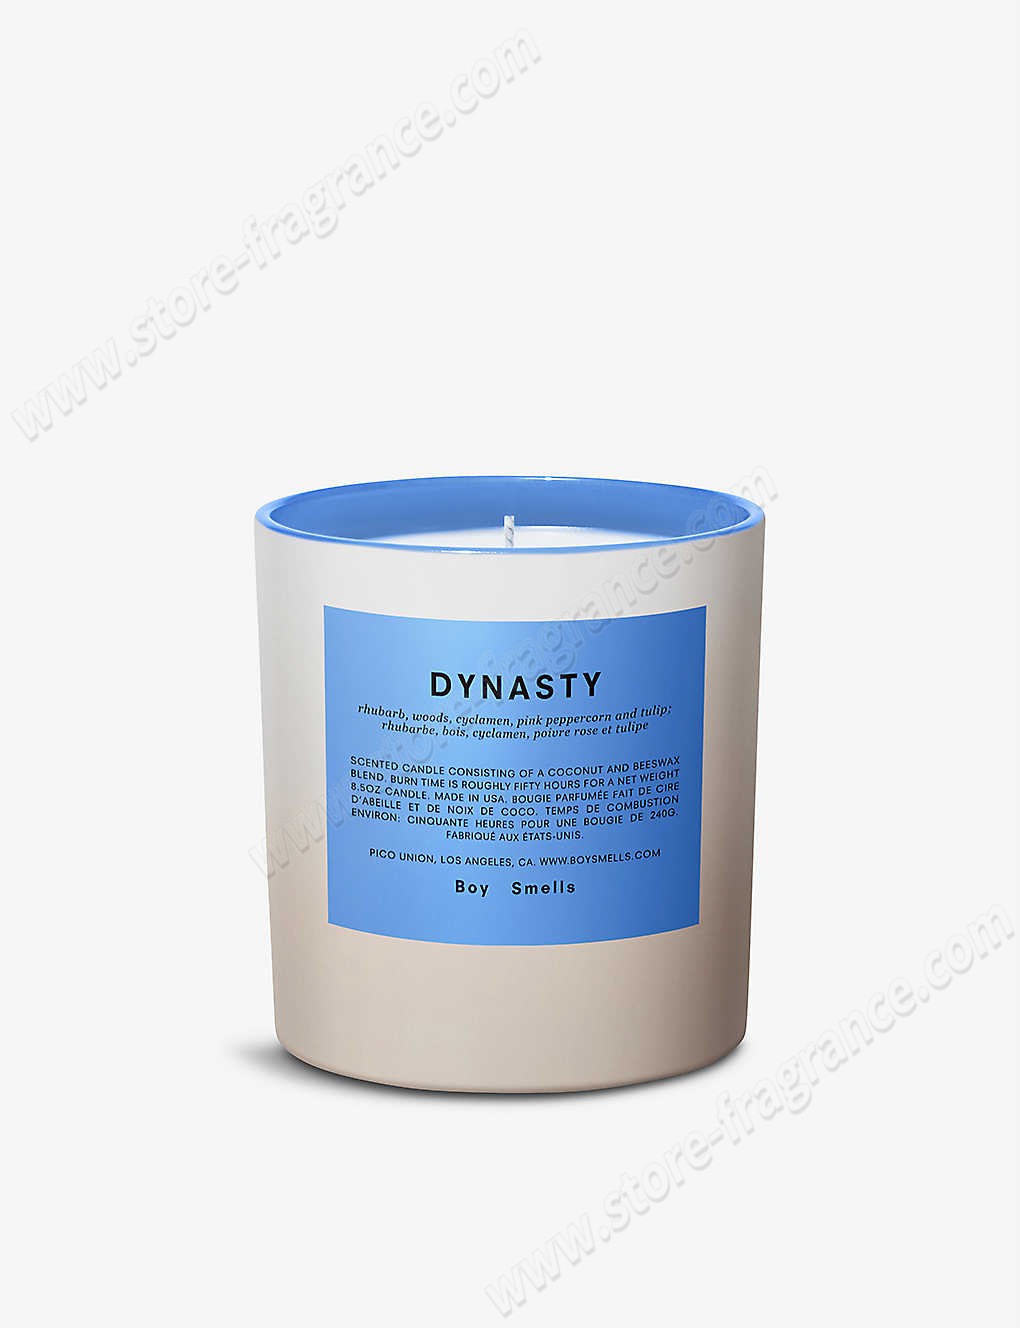 BOY SMELLS/Pride Dynasty limited-edition scented candle 240g ✿ Discount Store - -0